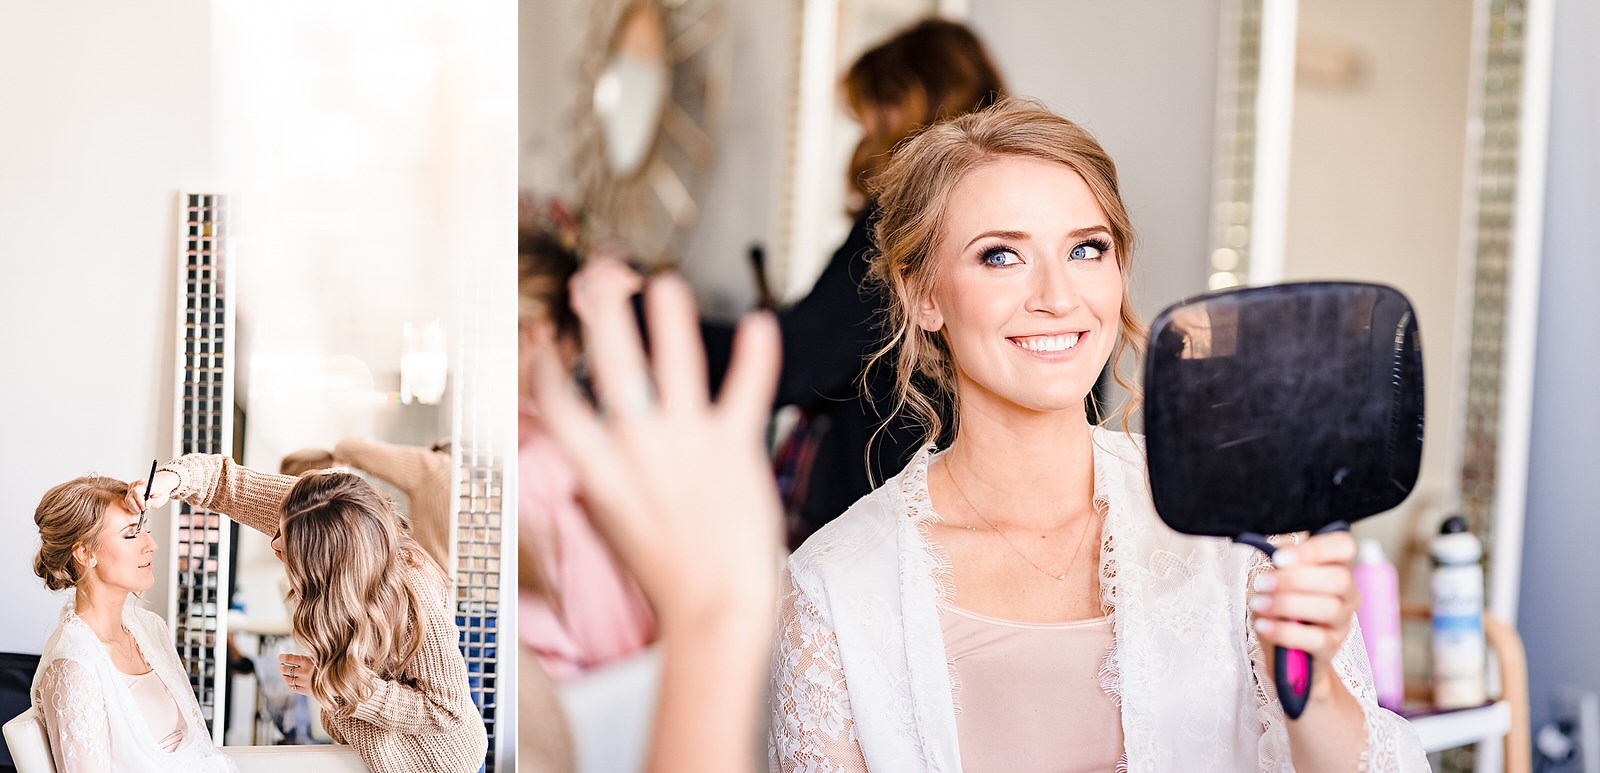 Make sure you hire a hair and makeup time that have you looking this happy with the results!